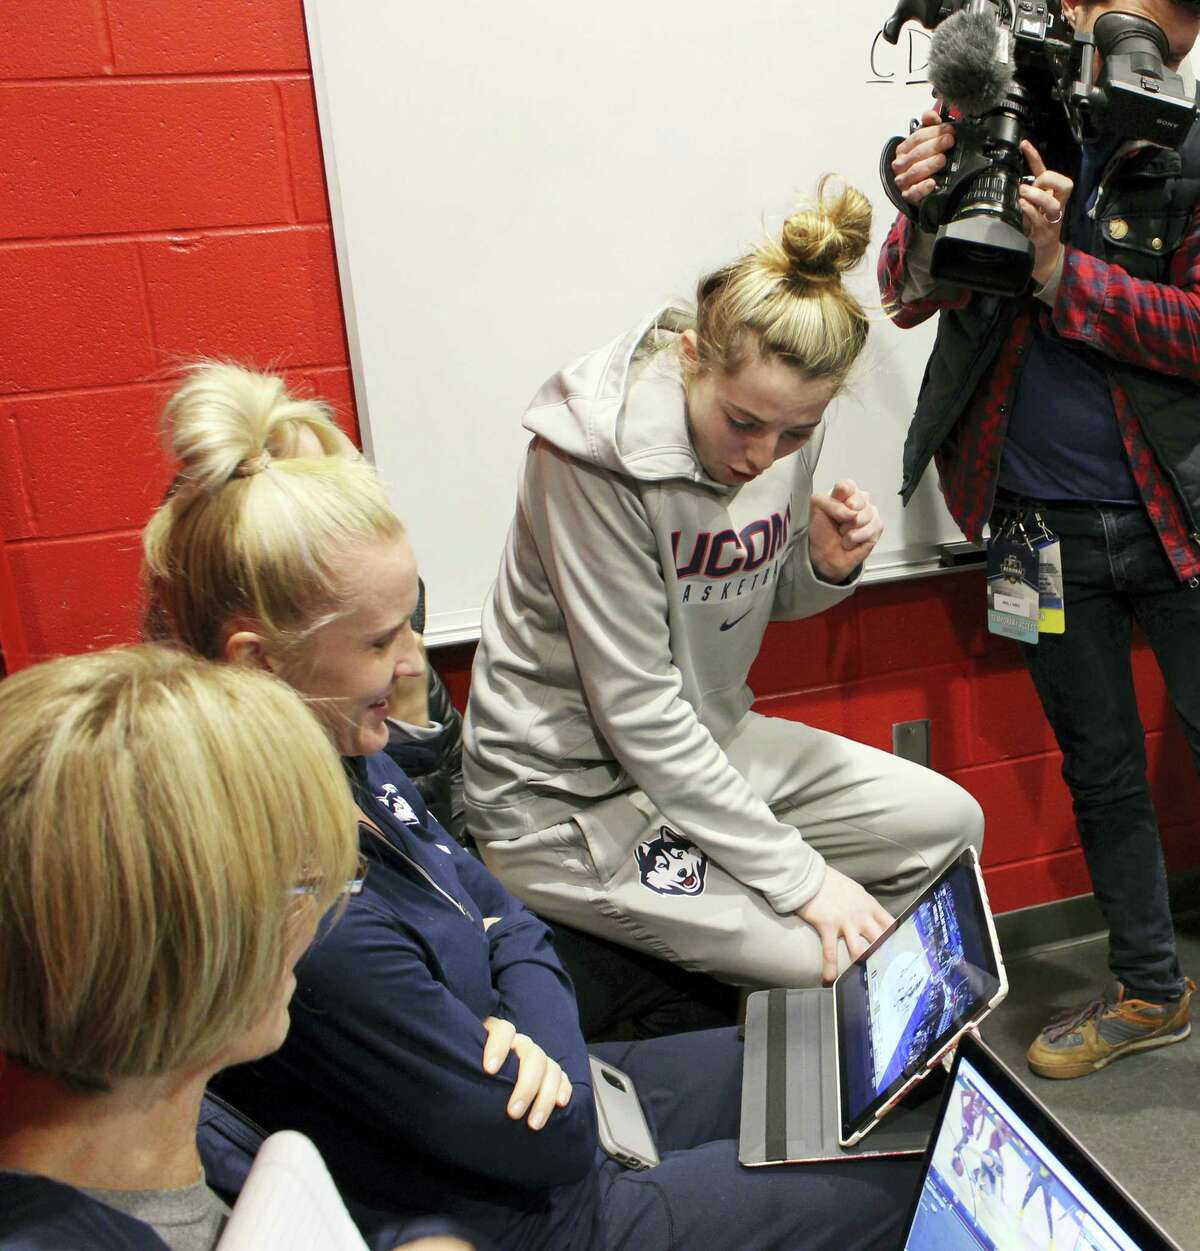 UConn’s Katie Lou Samuelson watches a computer in the team’s locker room in Bridgeport as her sister Karlie’s Stanford team takes on Notre Dame in the Lexington regional on Sunday.